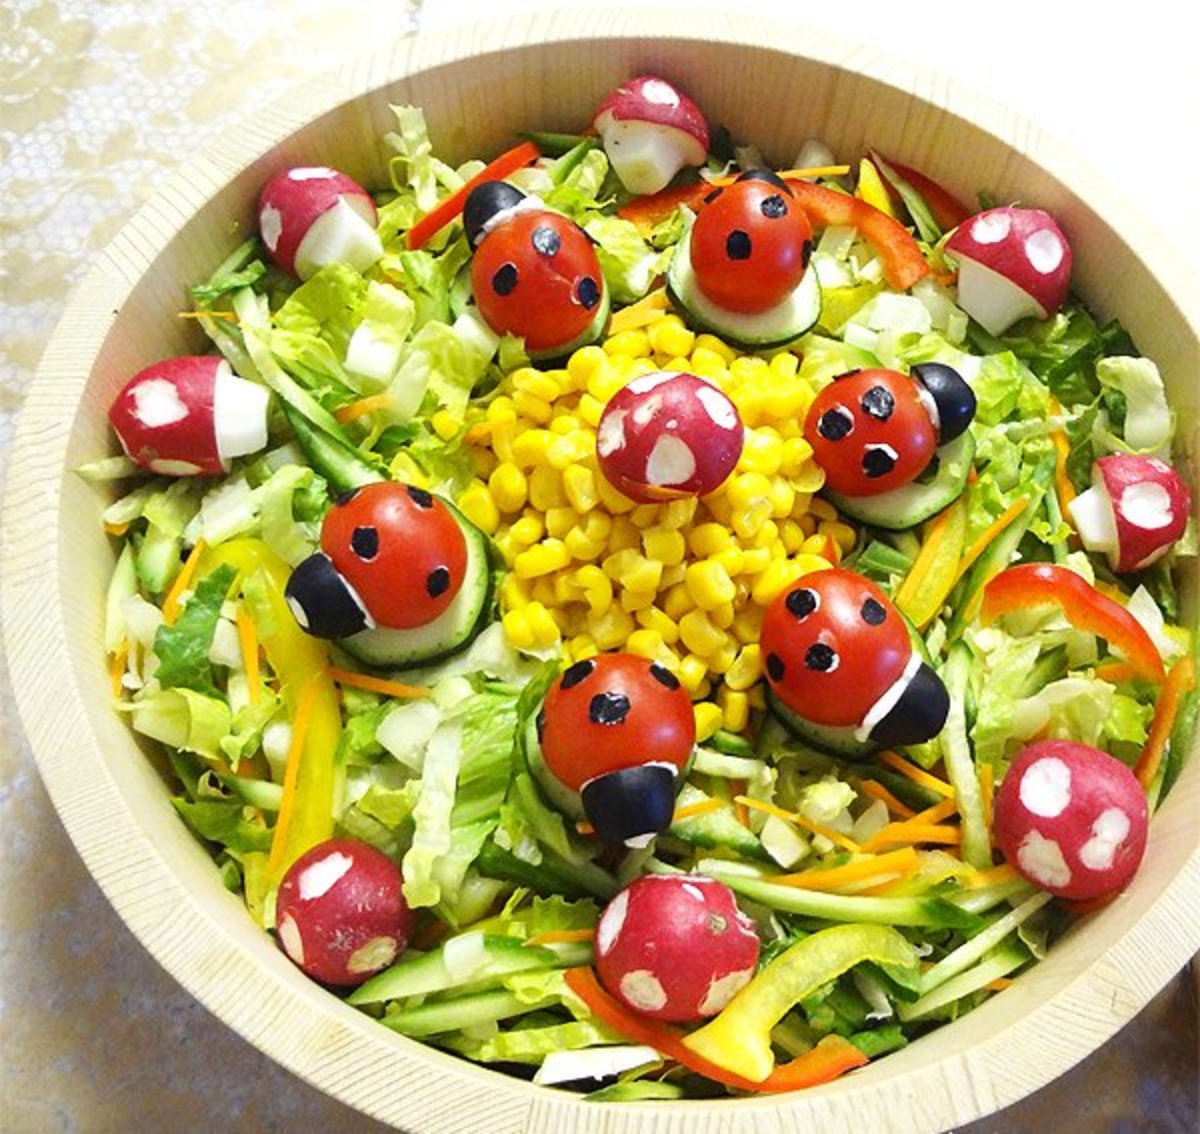 This adorable ladybug salad is perfect for Easter.